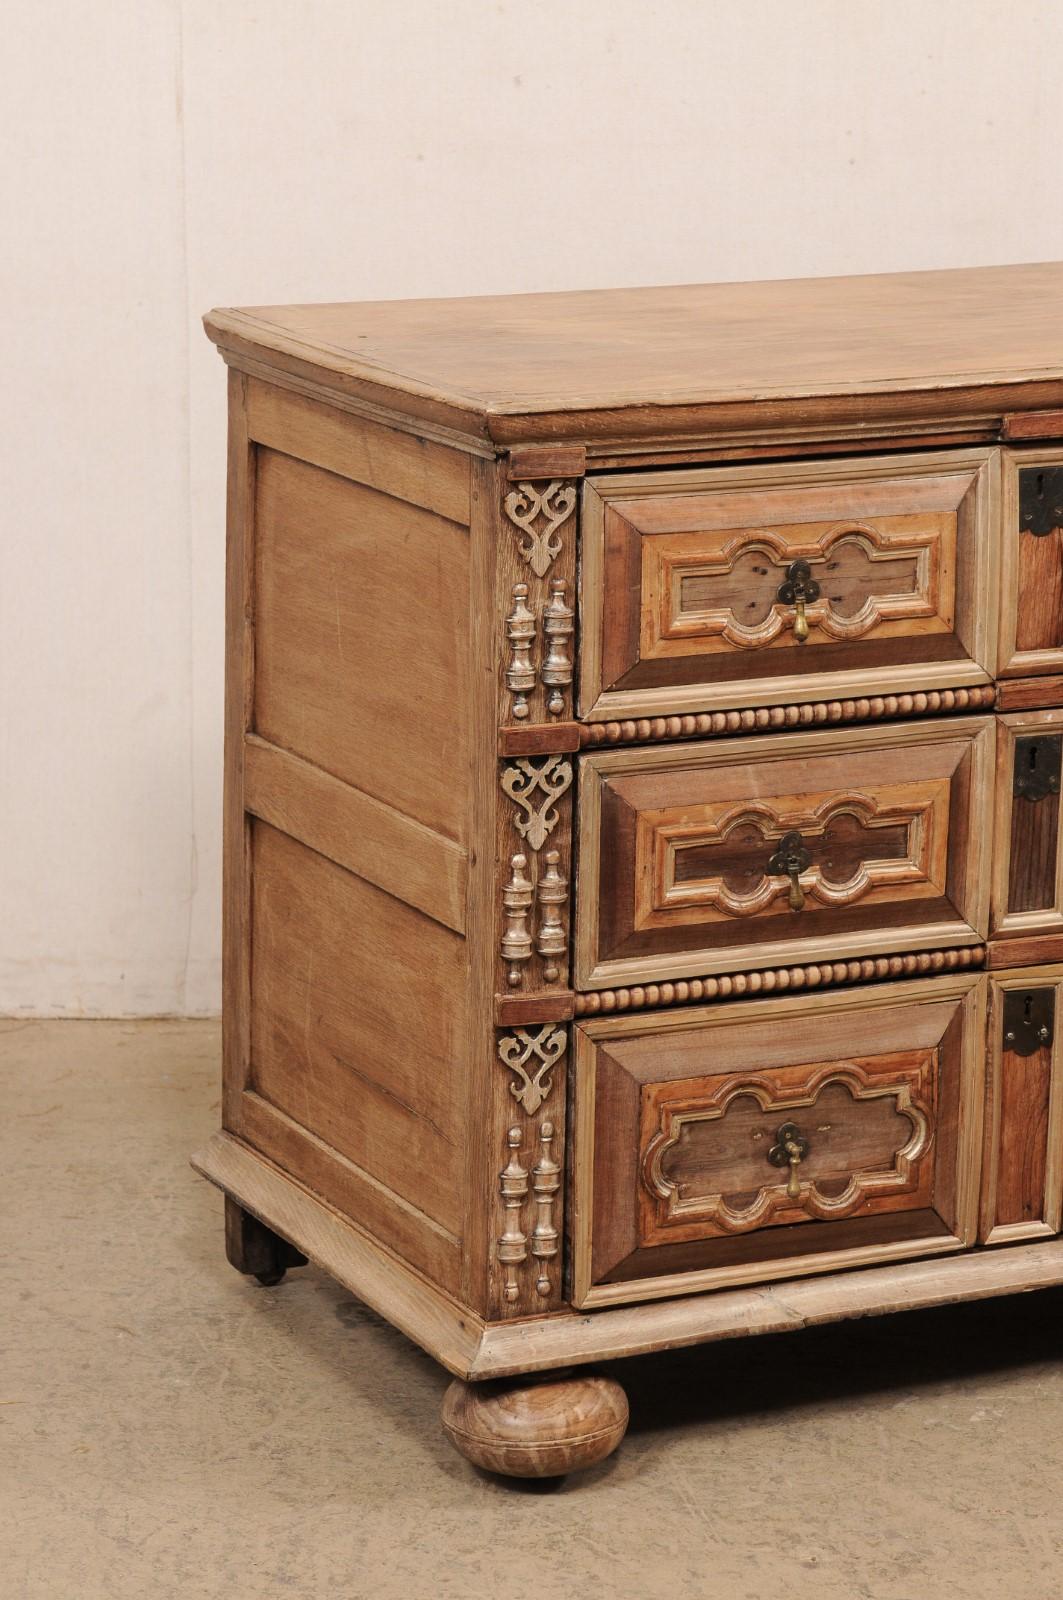 19th Century Antique English Highly-Decorated Carved-Wood Chest of Drawers For Sale